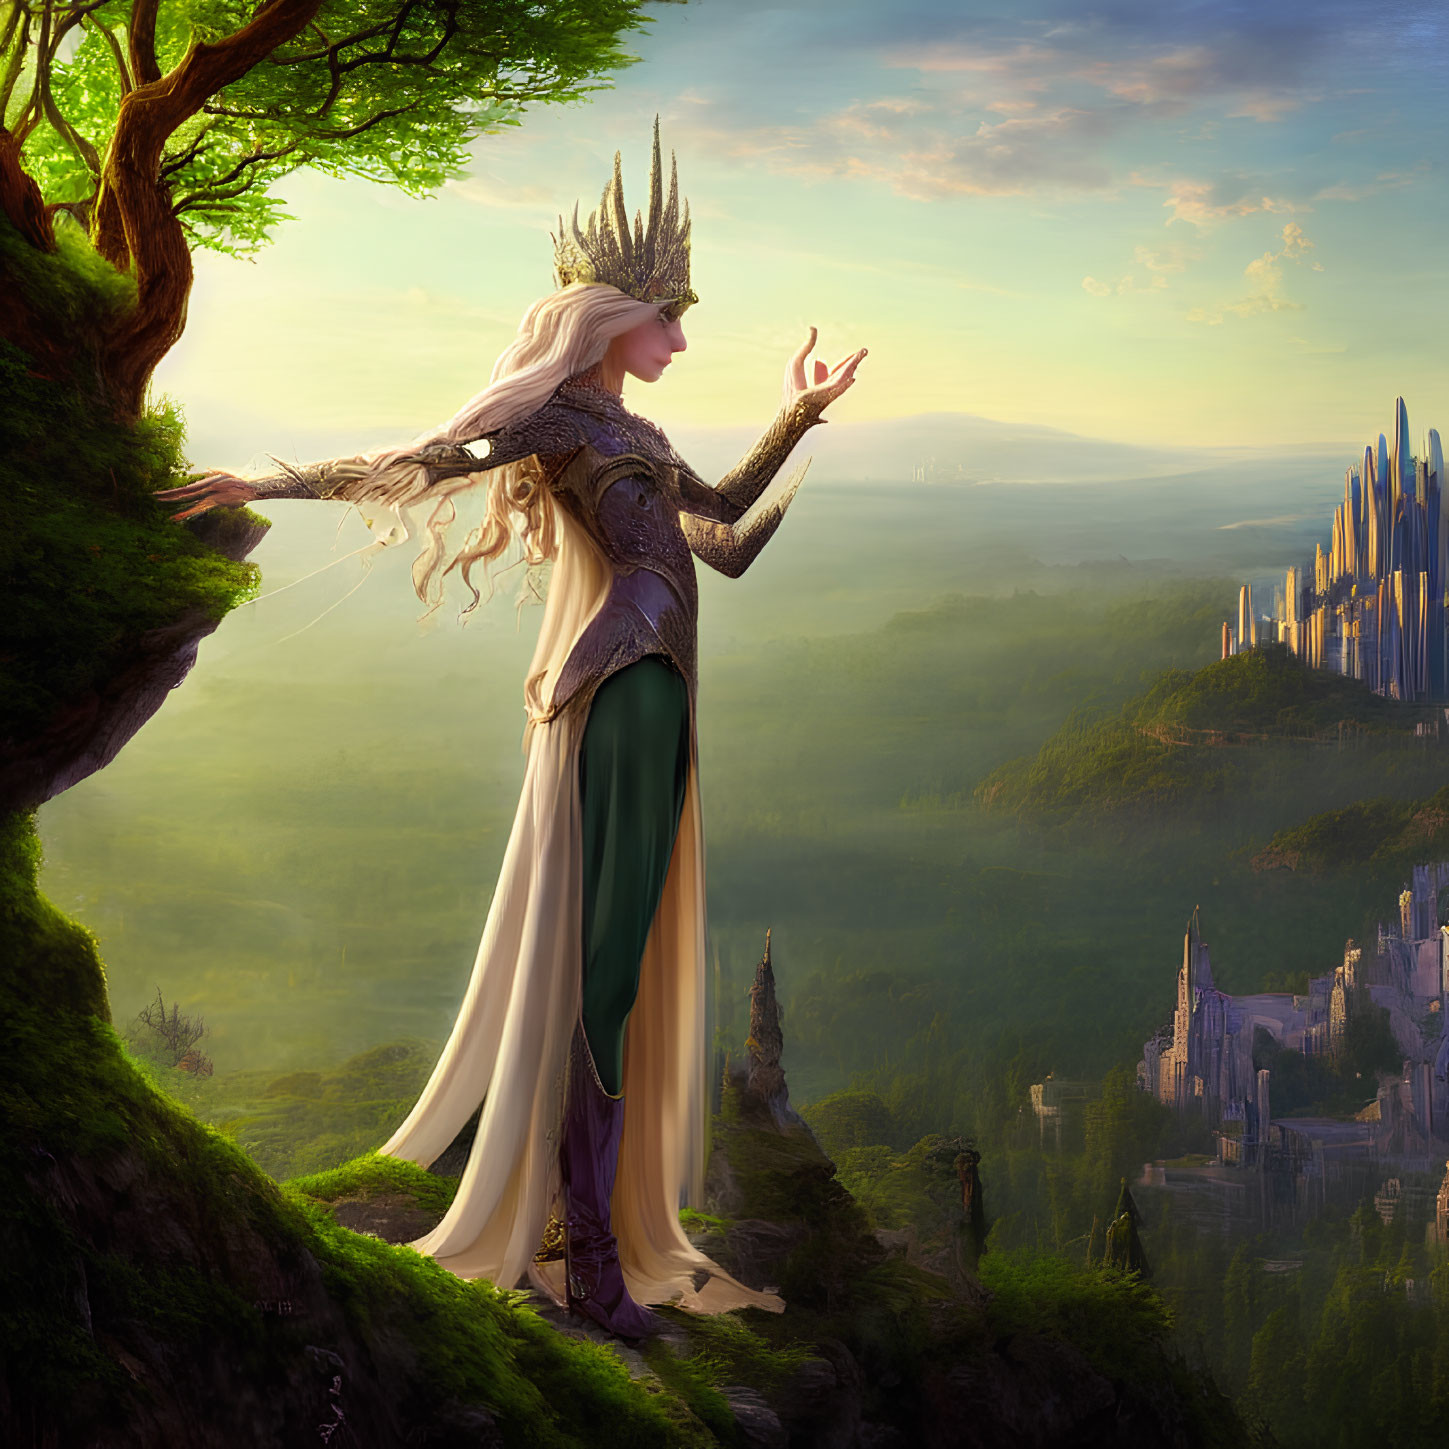 Ethereal elf queen in ornate armor on cliff with fantasy landscape